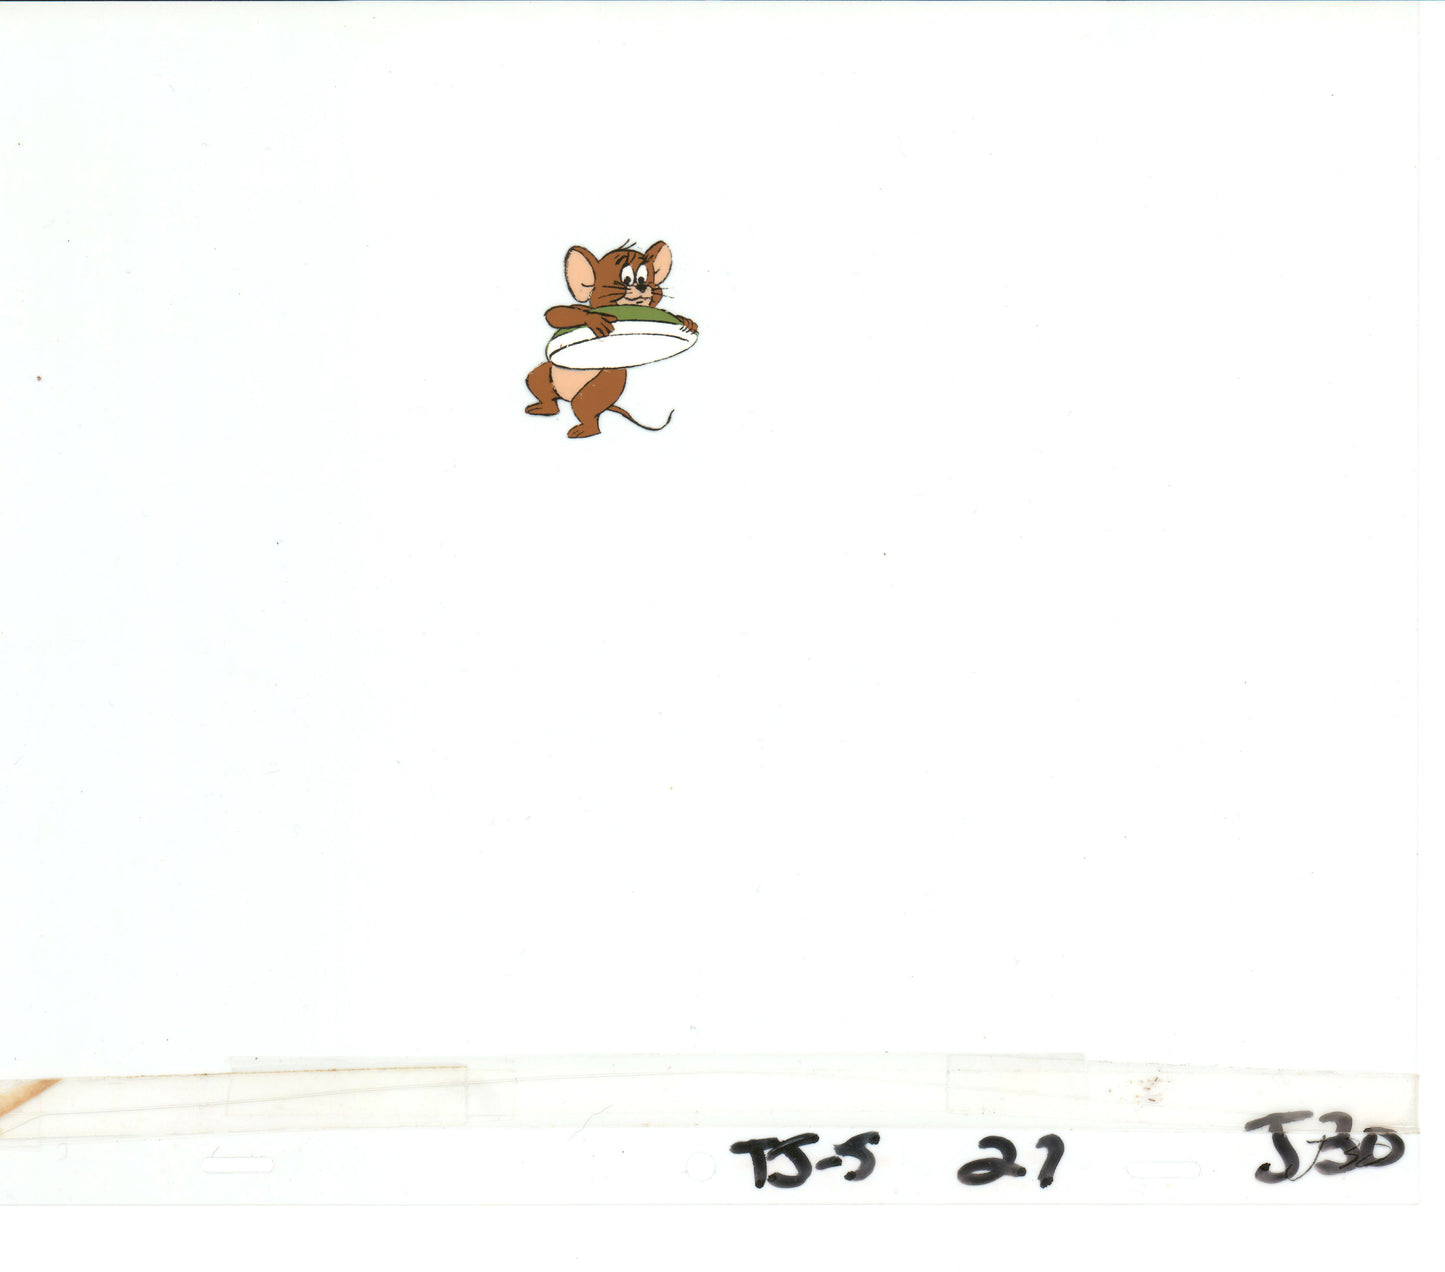 Tom & Jerry Original Production Animation Cel from Filmation 1980-82 b4445